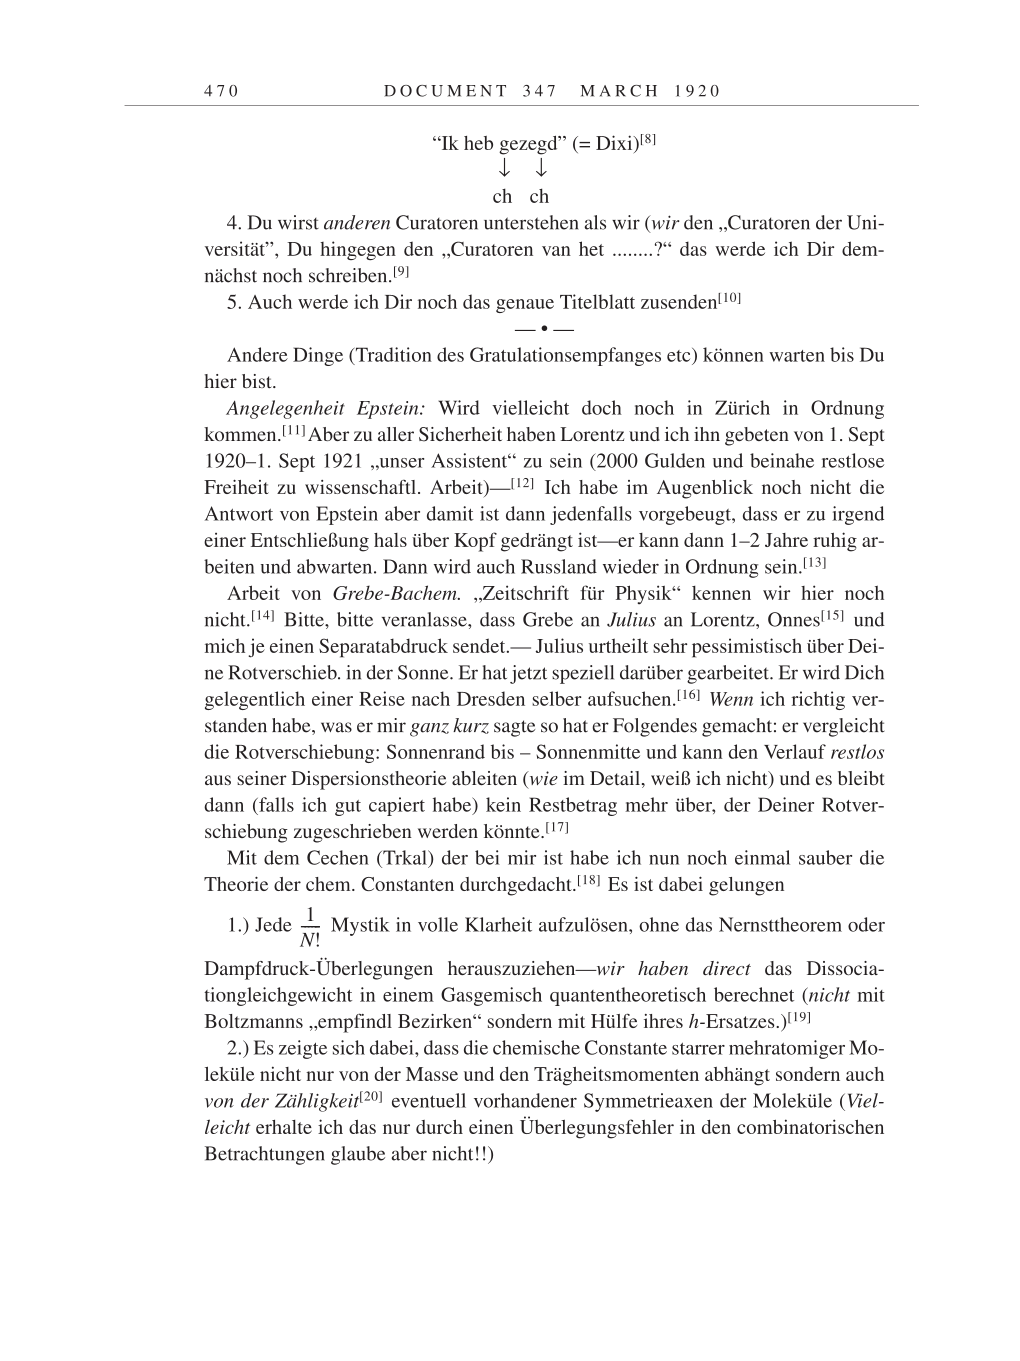 Volume 9: The Berlin Years: Correspondence January 1919-April 1920 page 470